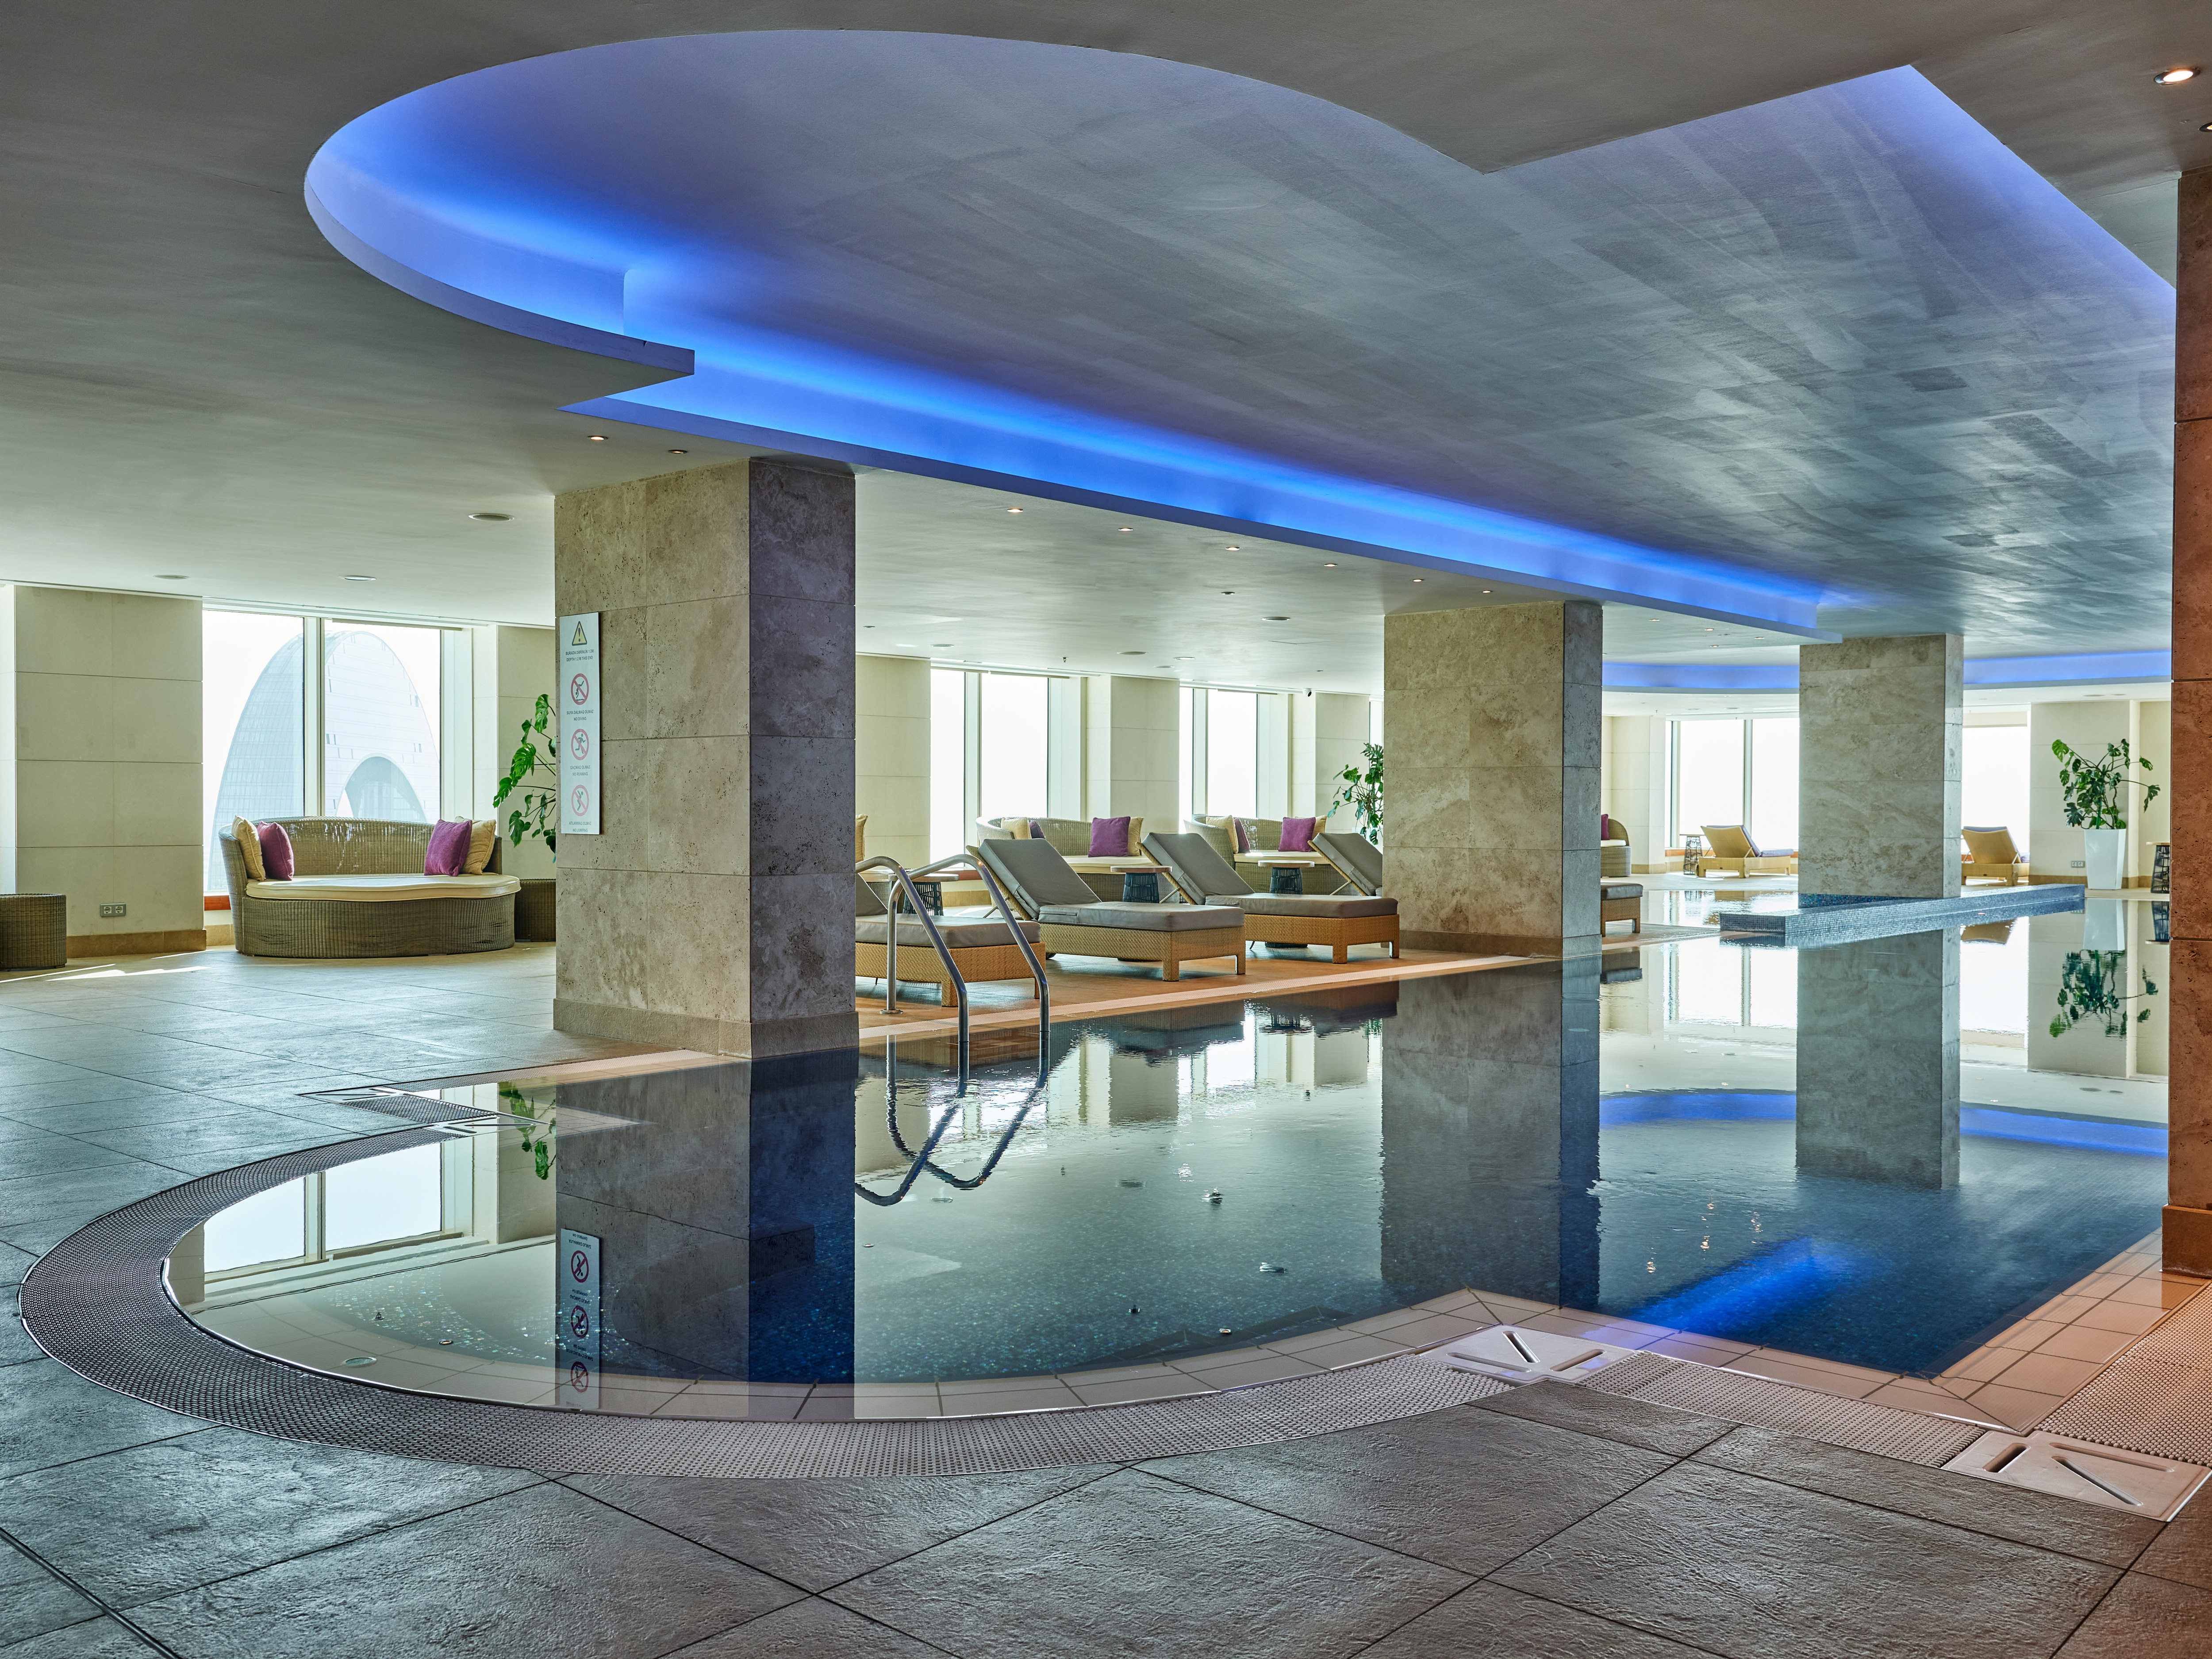 eforea Spa Relaxation Pool